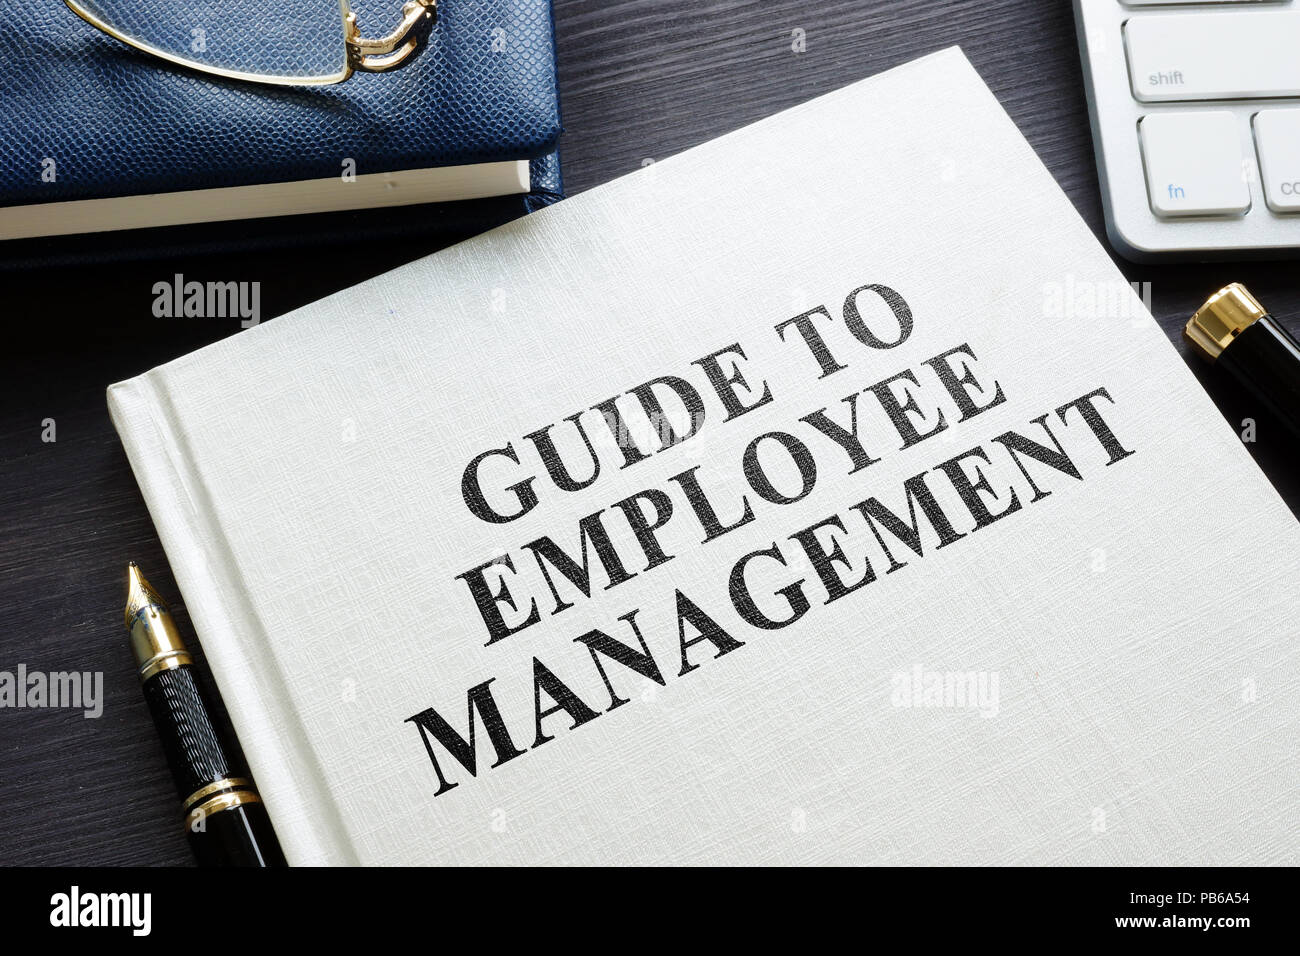 Guide to Employee Management in the office. Stock Photo